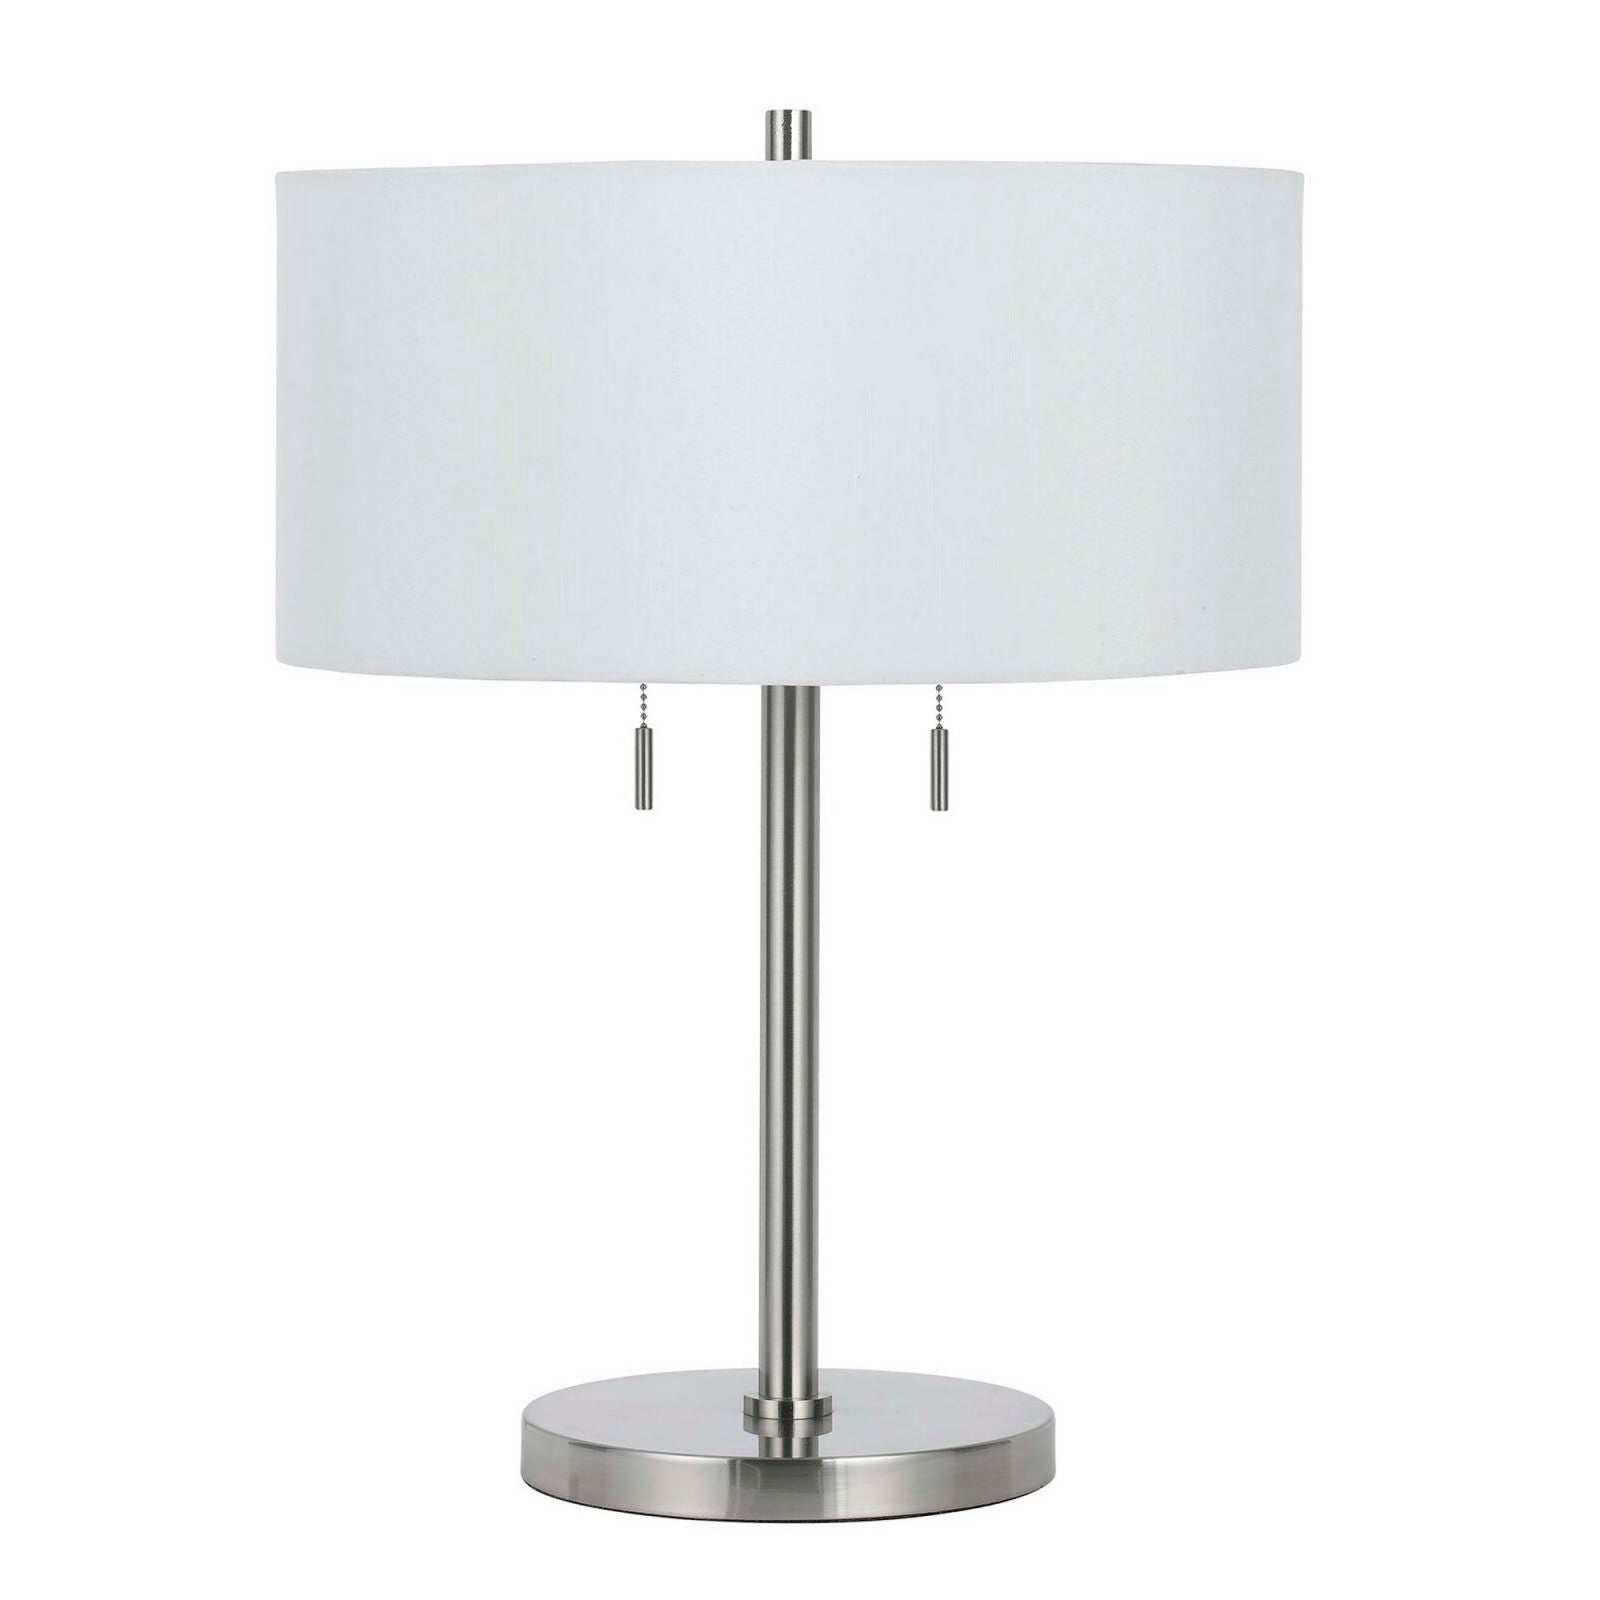 Metal Body Table Lamp With Fabric Drum Shade And Pull Chain Switch, Silver By Benzara